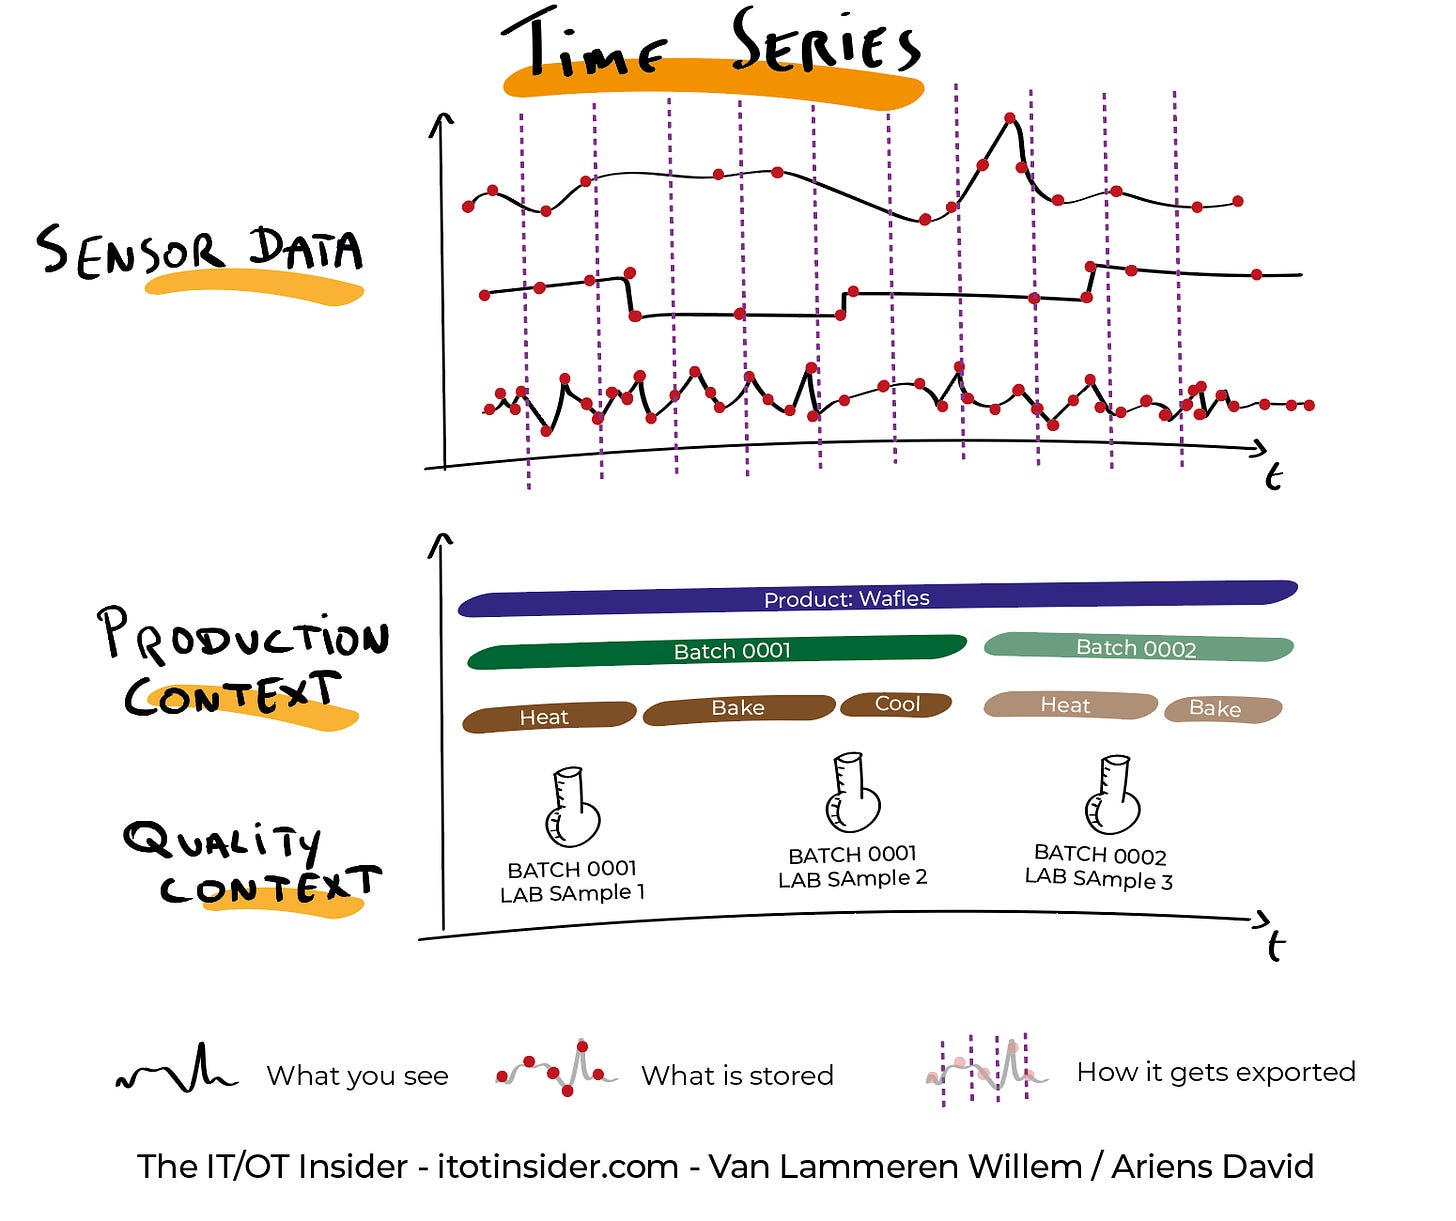 Time series data / sensor data explained with product and quality context infographic